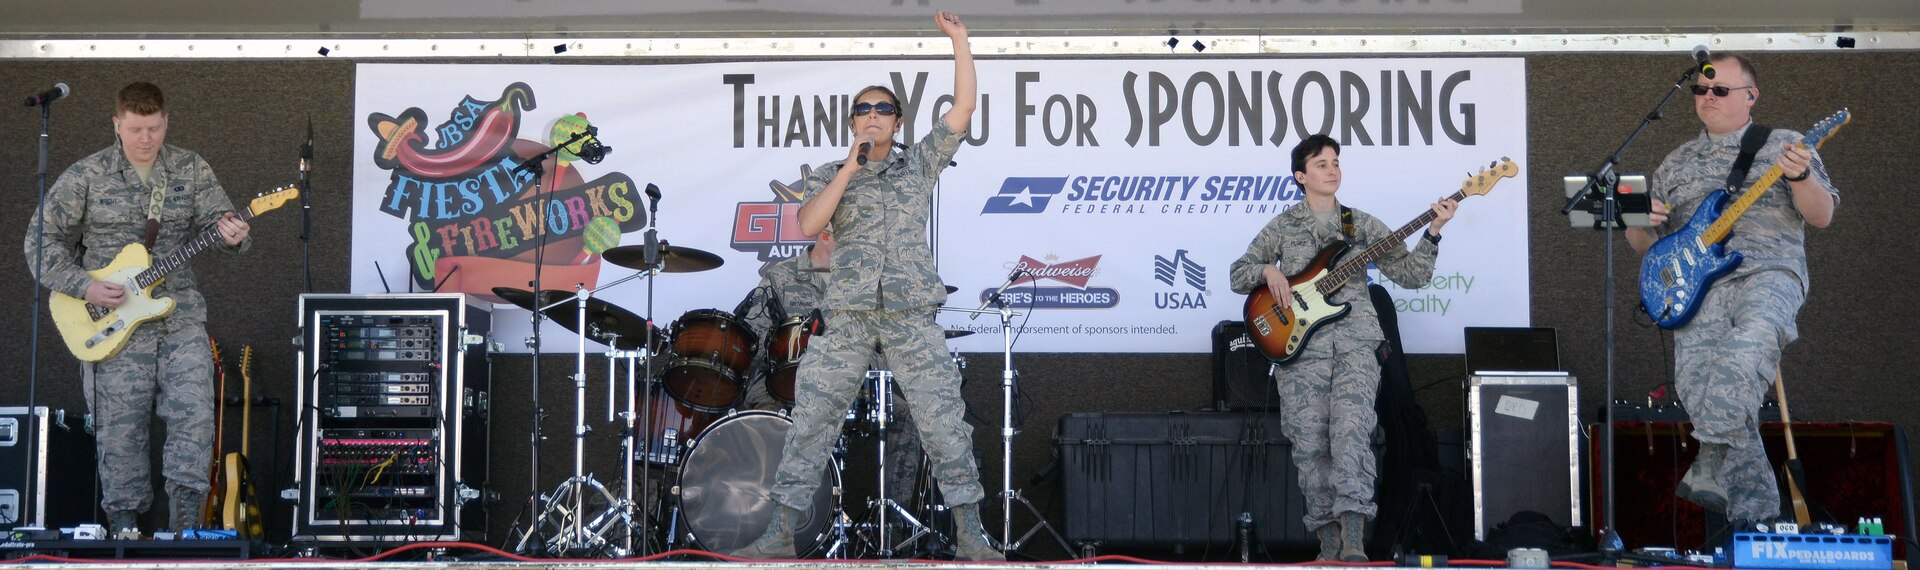 Members of the U.S. Air Force band of the West get their groove on for the crowd at the Fiesta and Fireworks event at Joint Base San Antonio-Fort Sam Houston April 23.